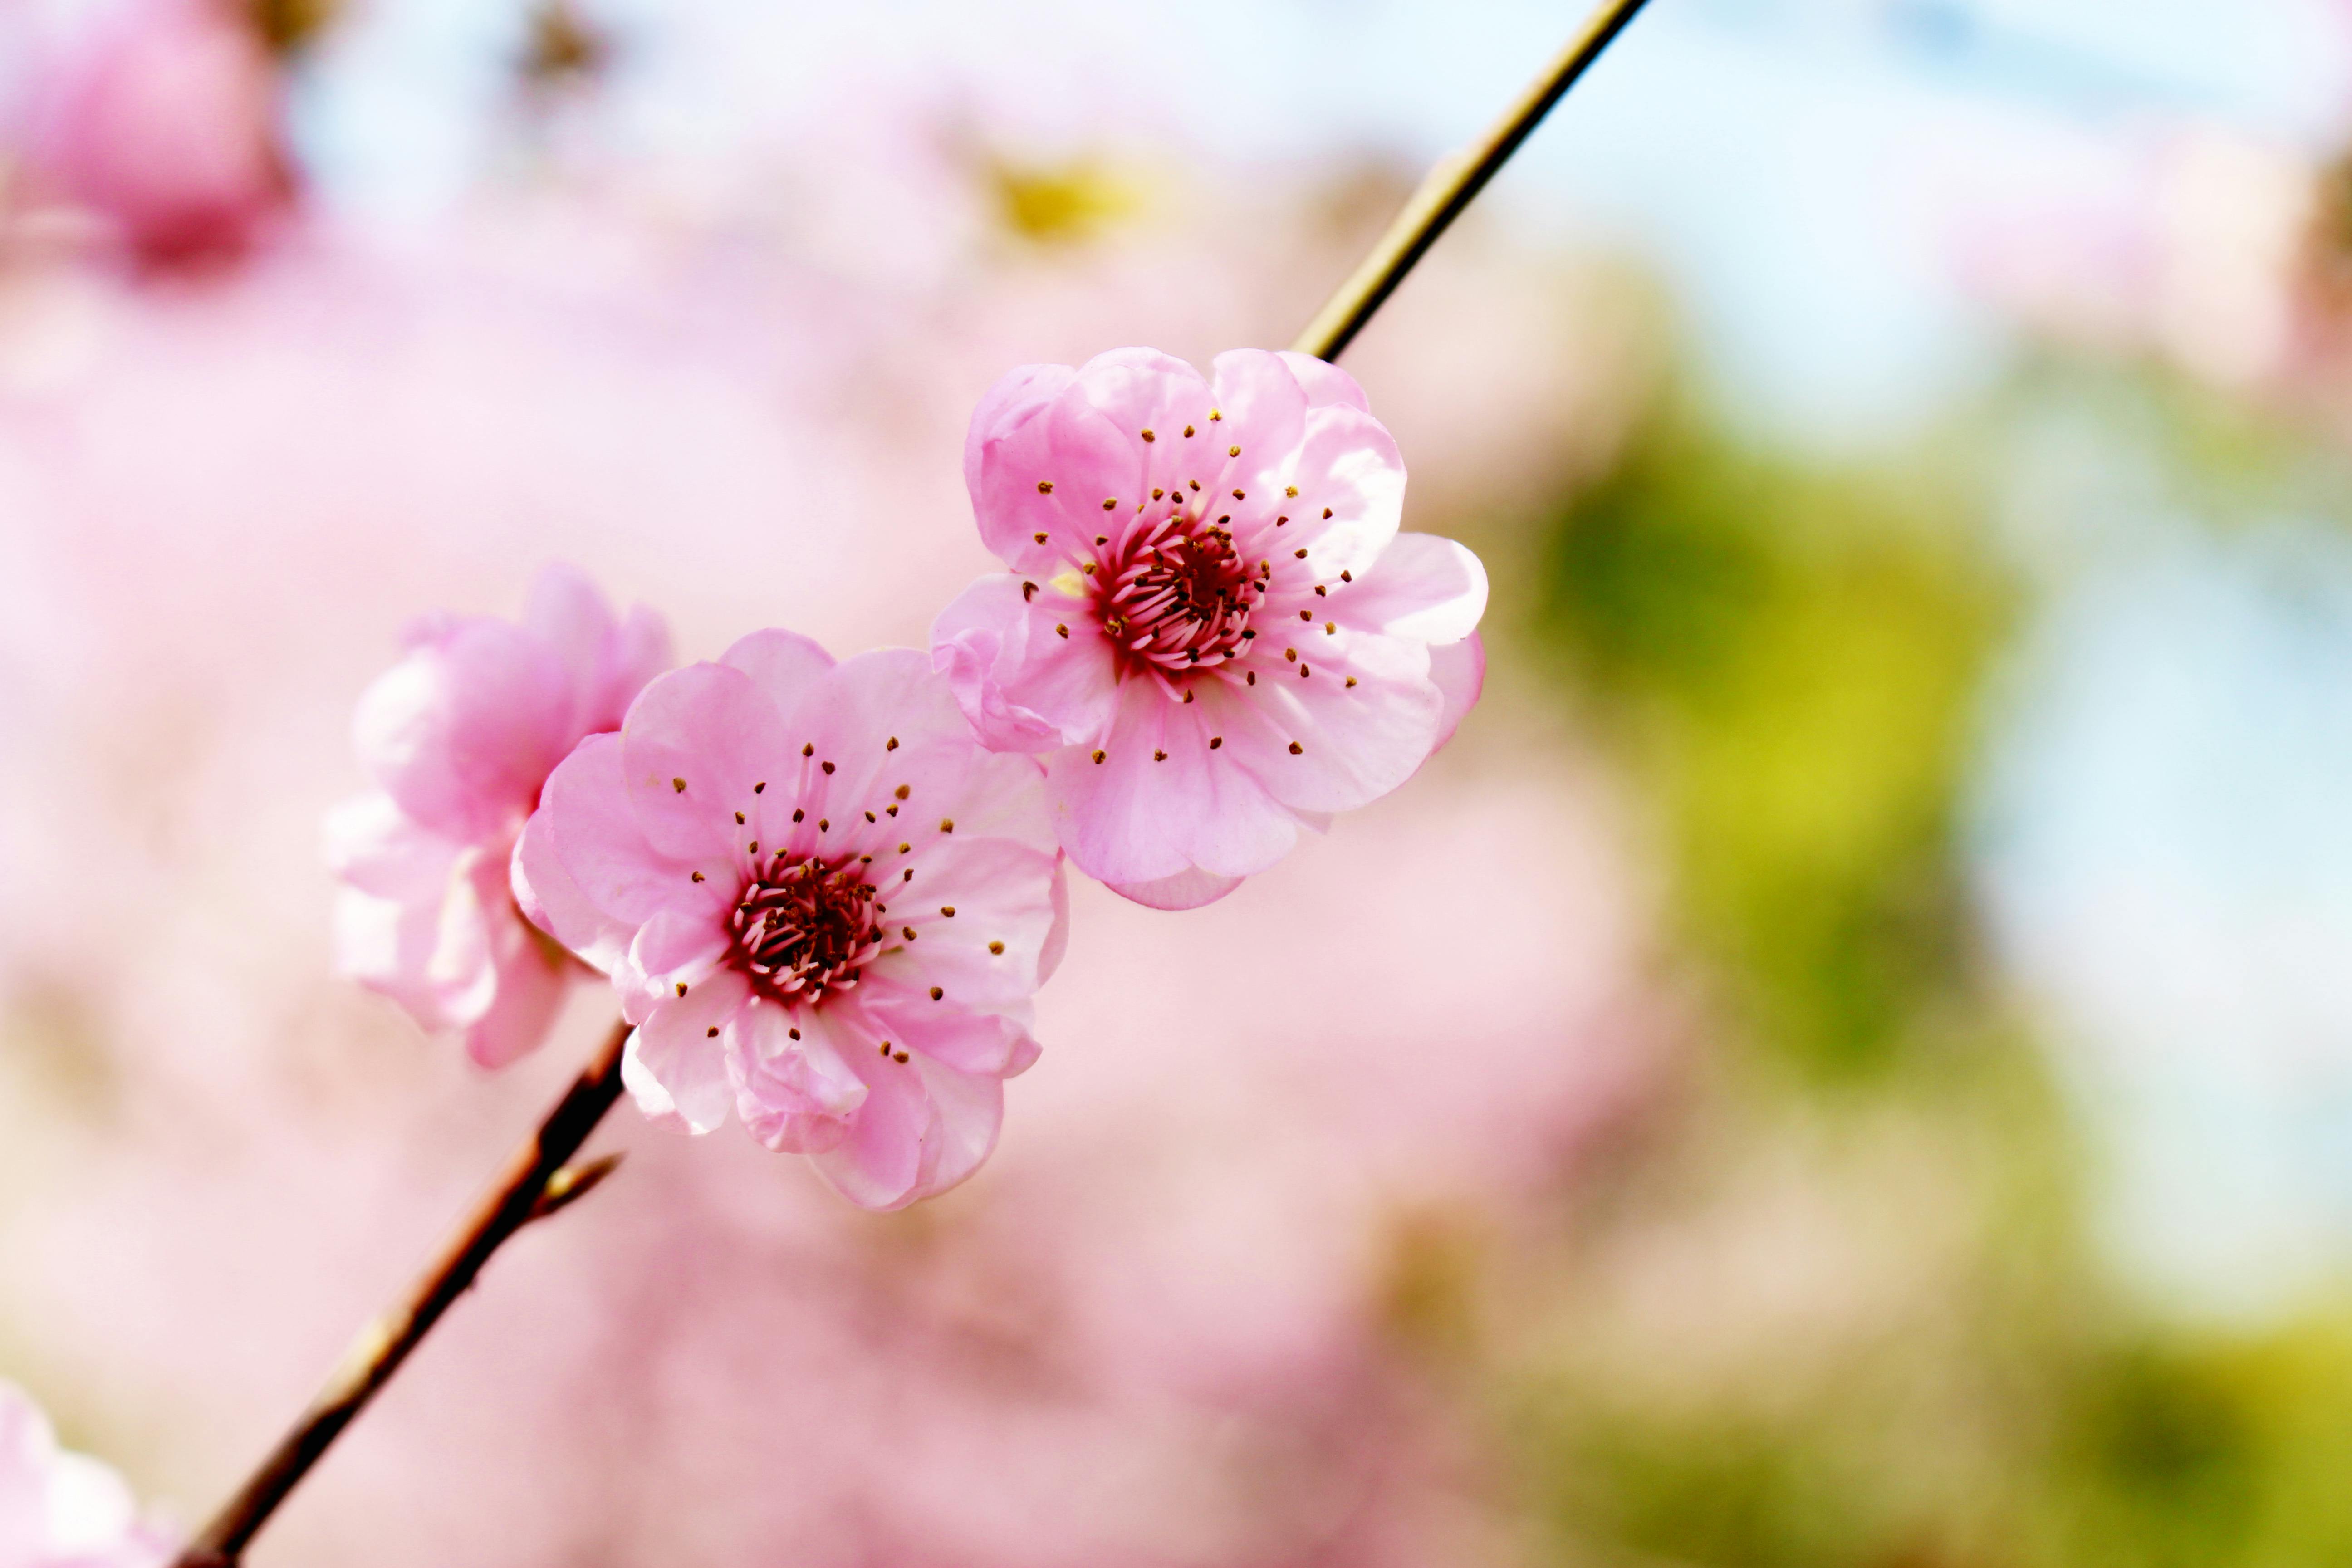  Pink Cherry Blossom  in Close Up Photography  Free Stock Photo